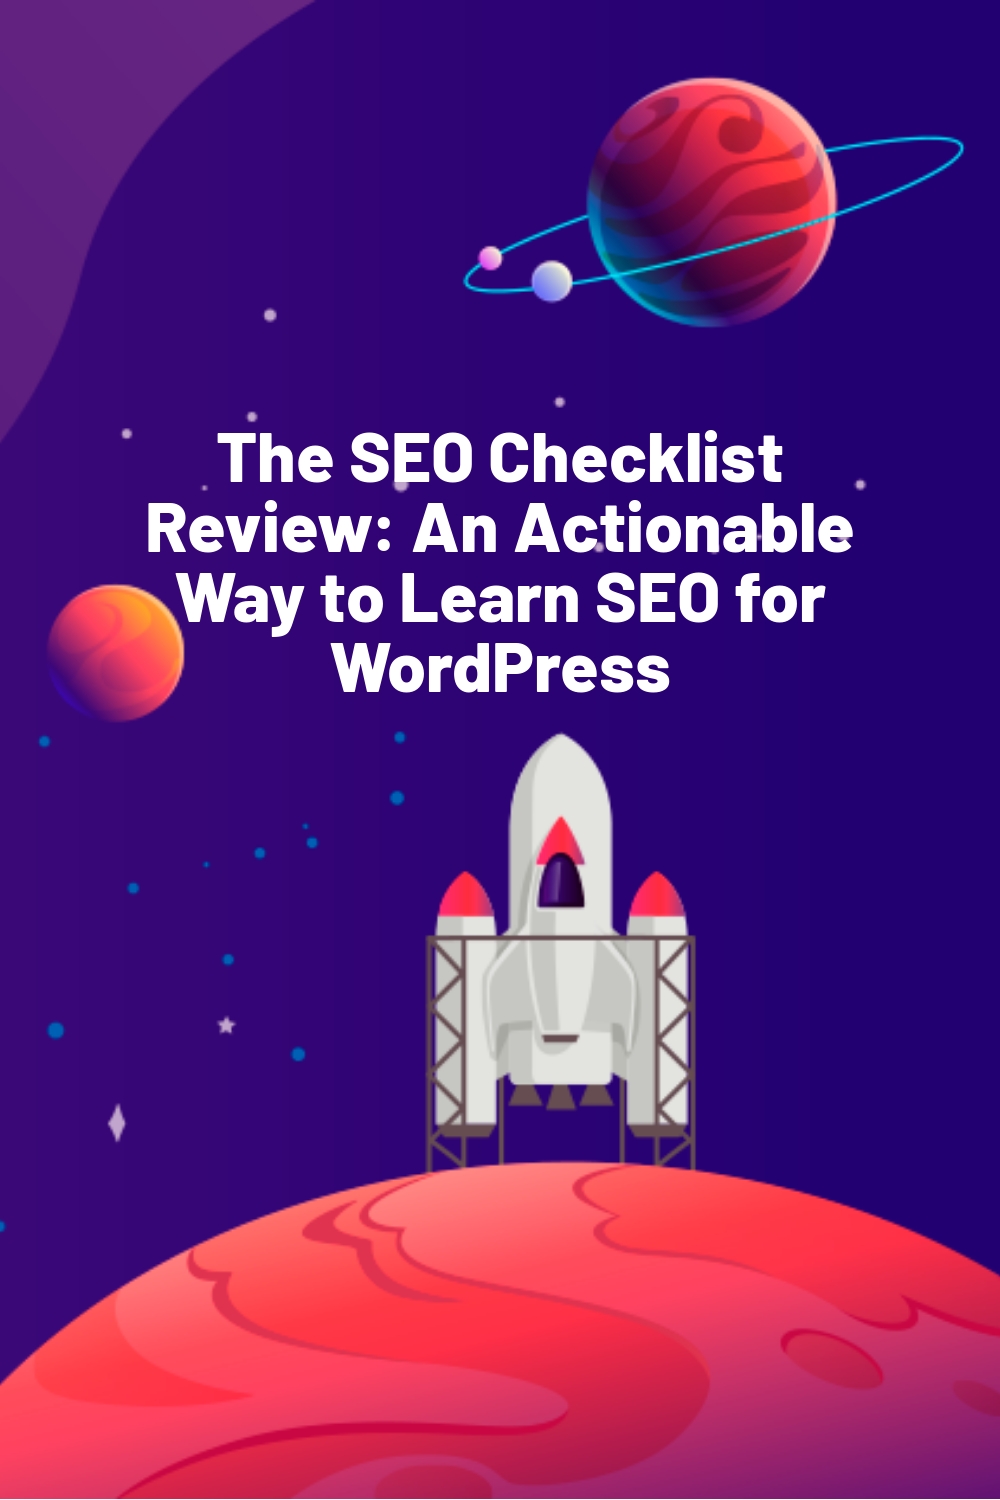 The SEO Checklist Review: An Actionable Way to Learn SEO for WordPress